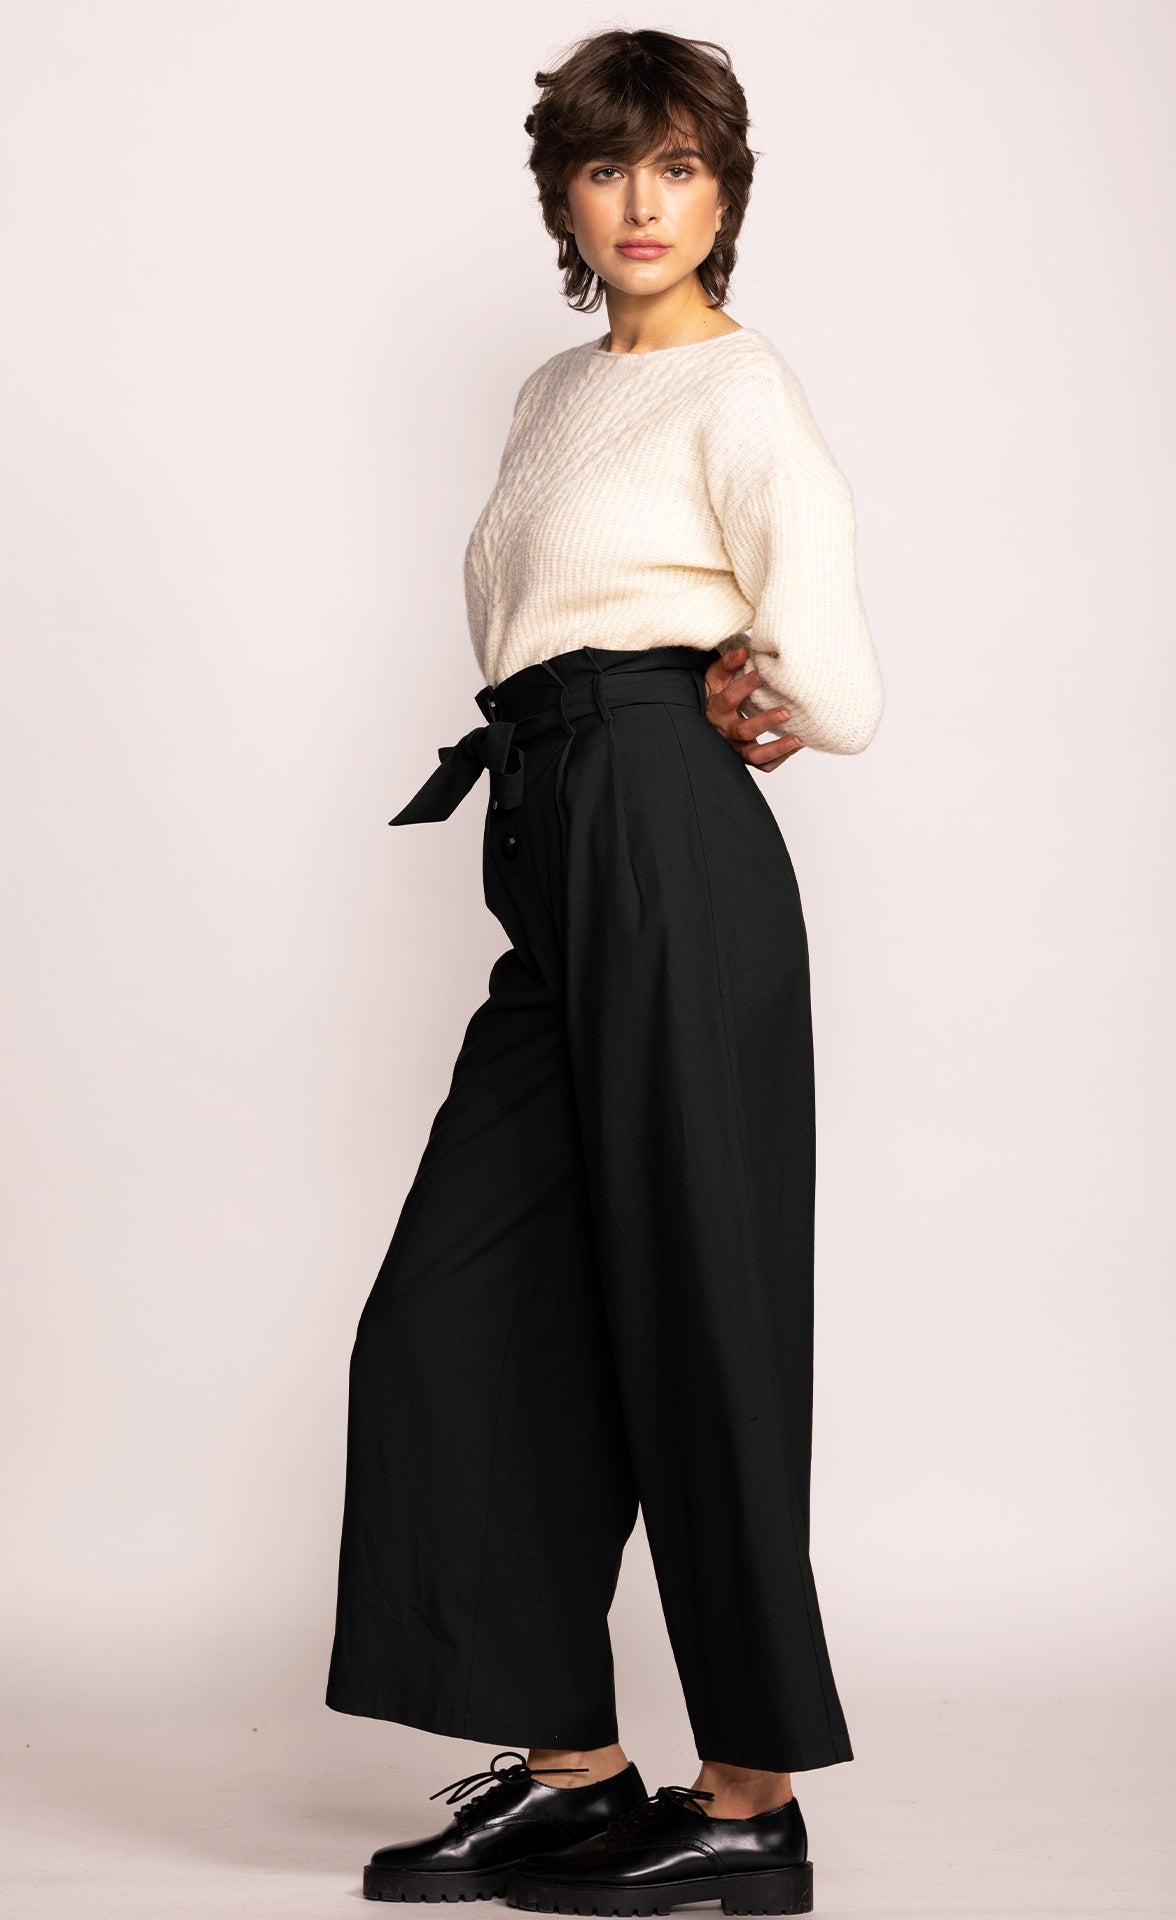 The Mia Pants - New Black - Pink Martini Collection